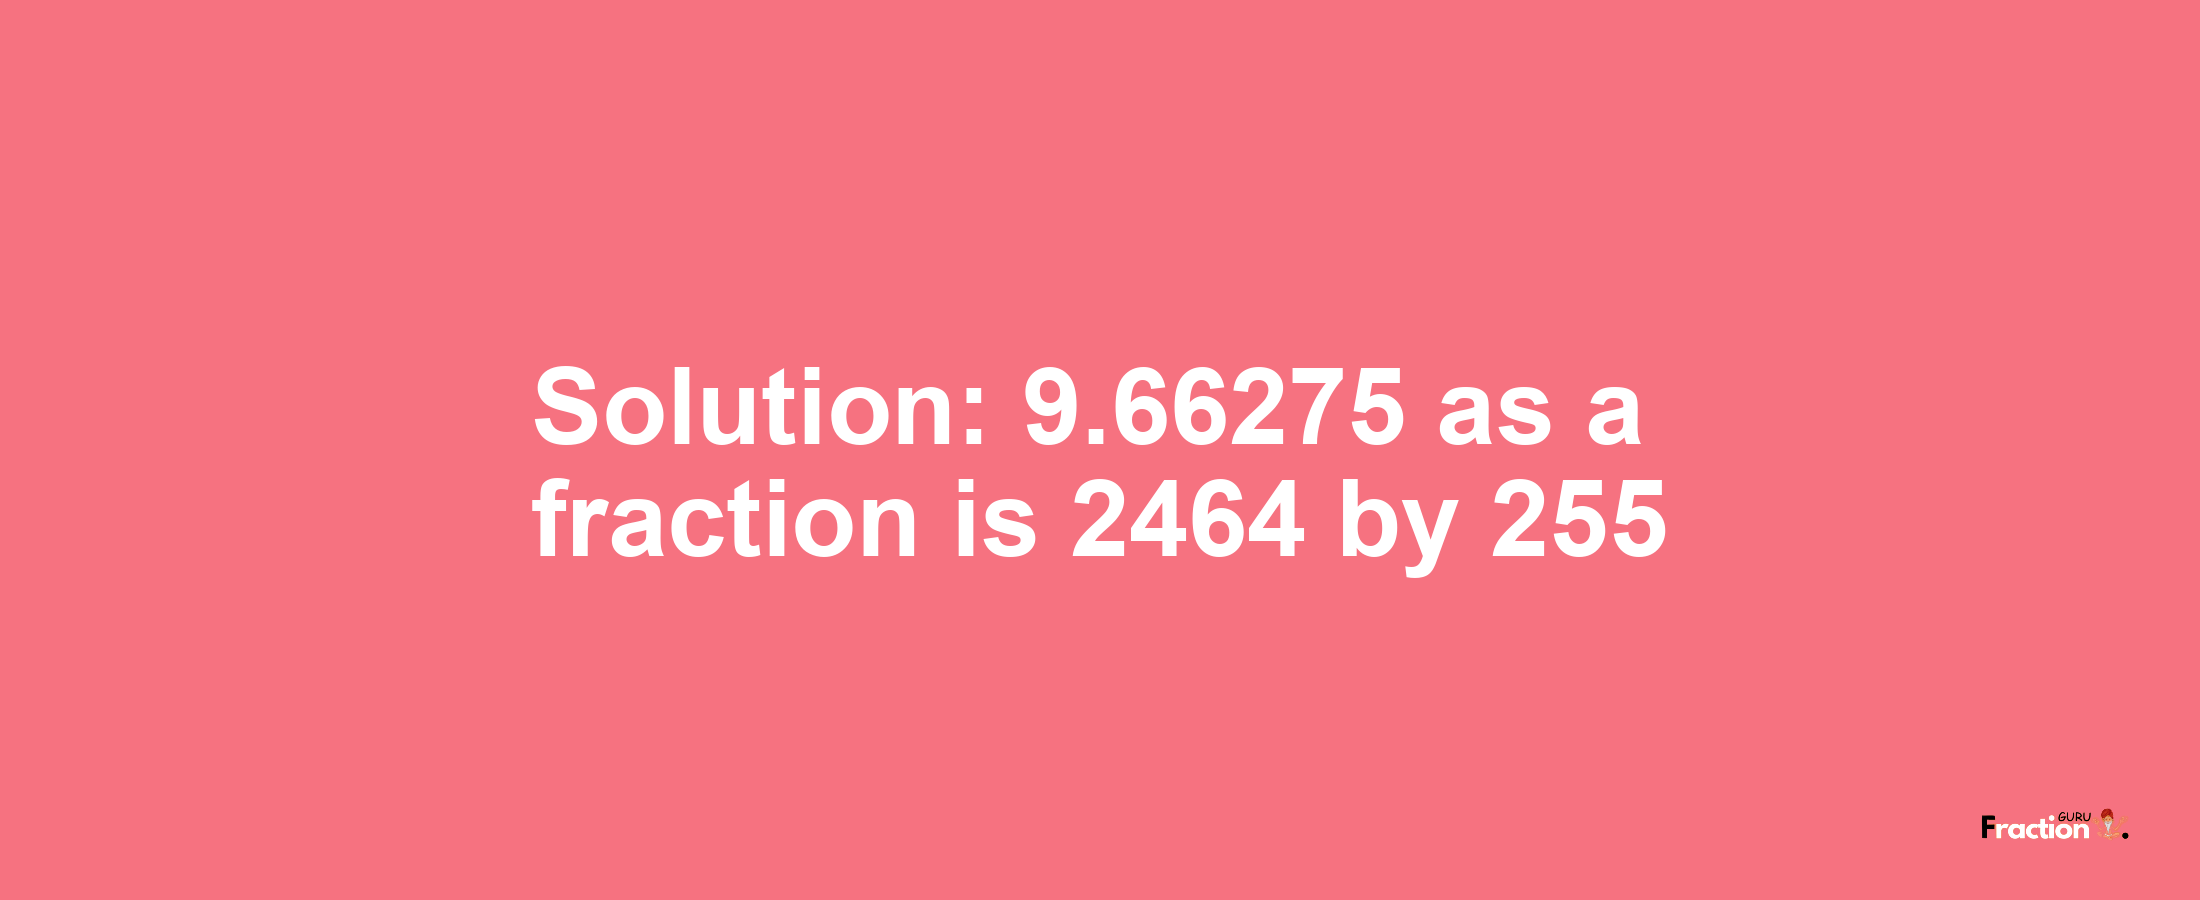 Solution:9.66275 as a fraction is 2464/255